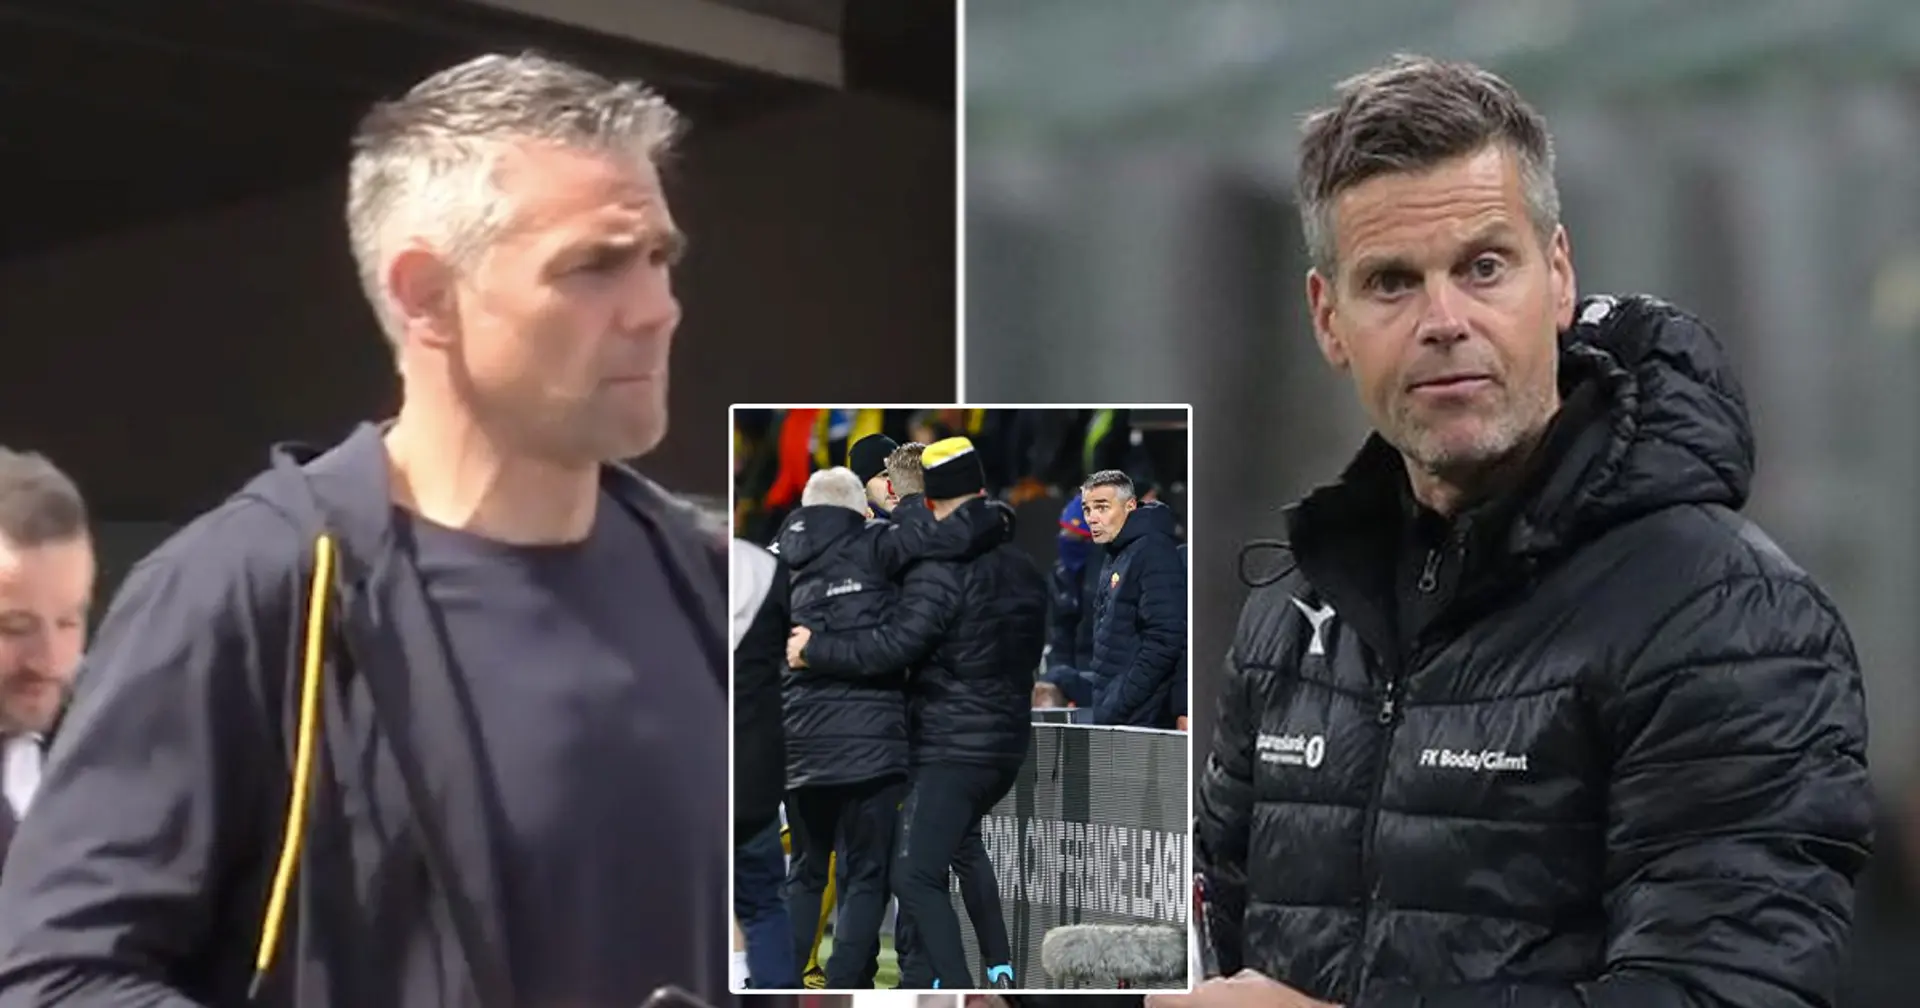 Roma accuse Bodo/Glimt manager of 'physically attacking' their goalkeeping coach, opponents retort with video claim